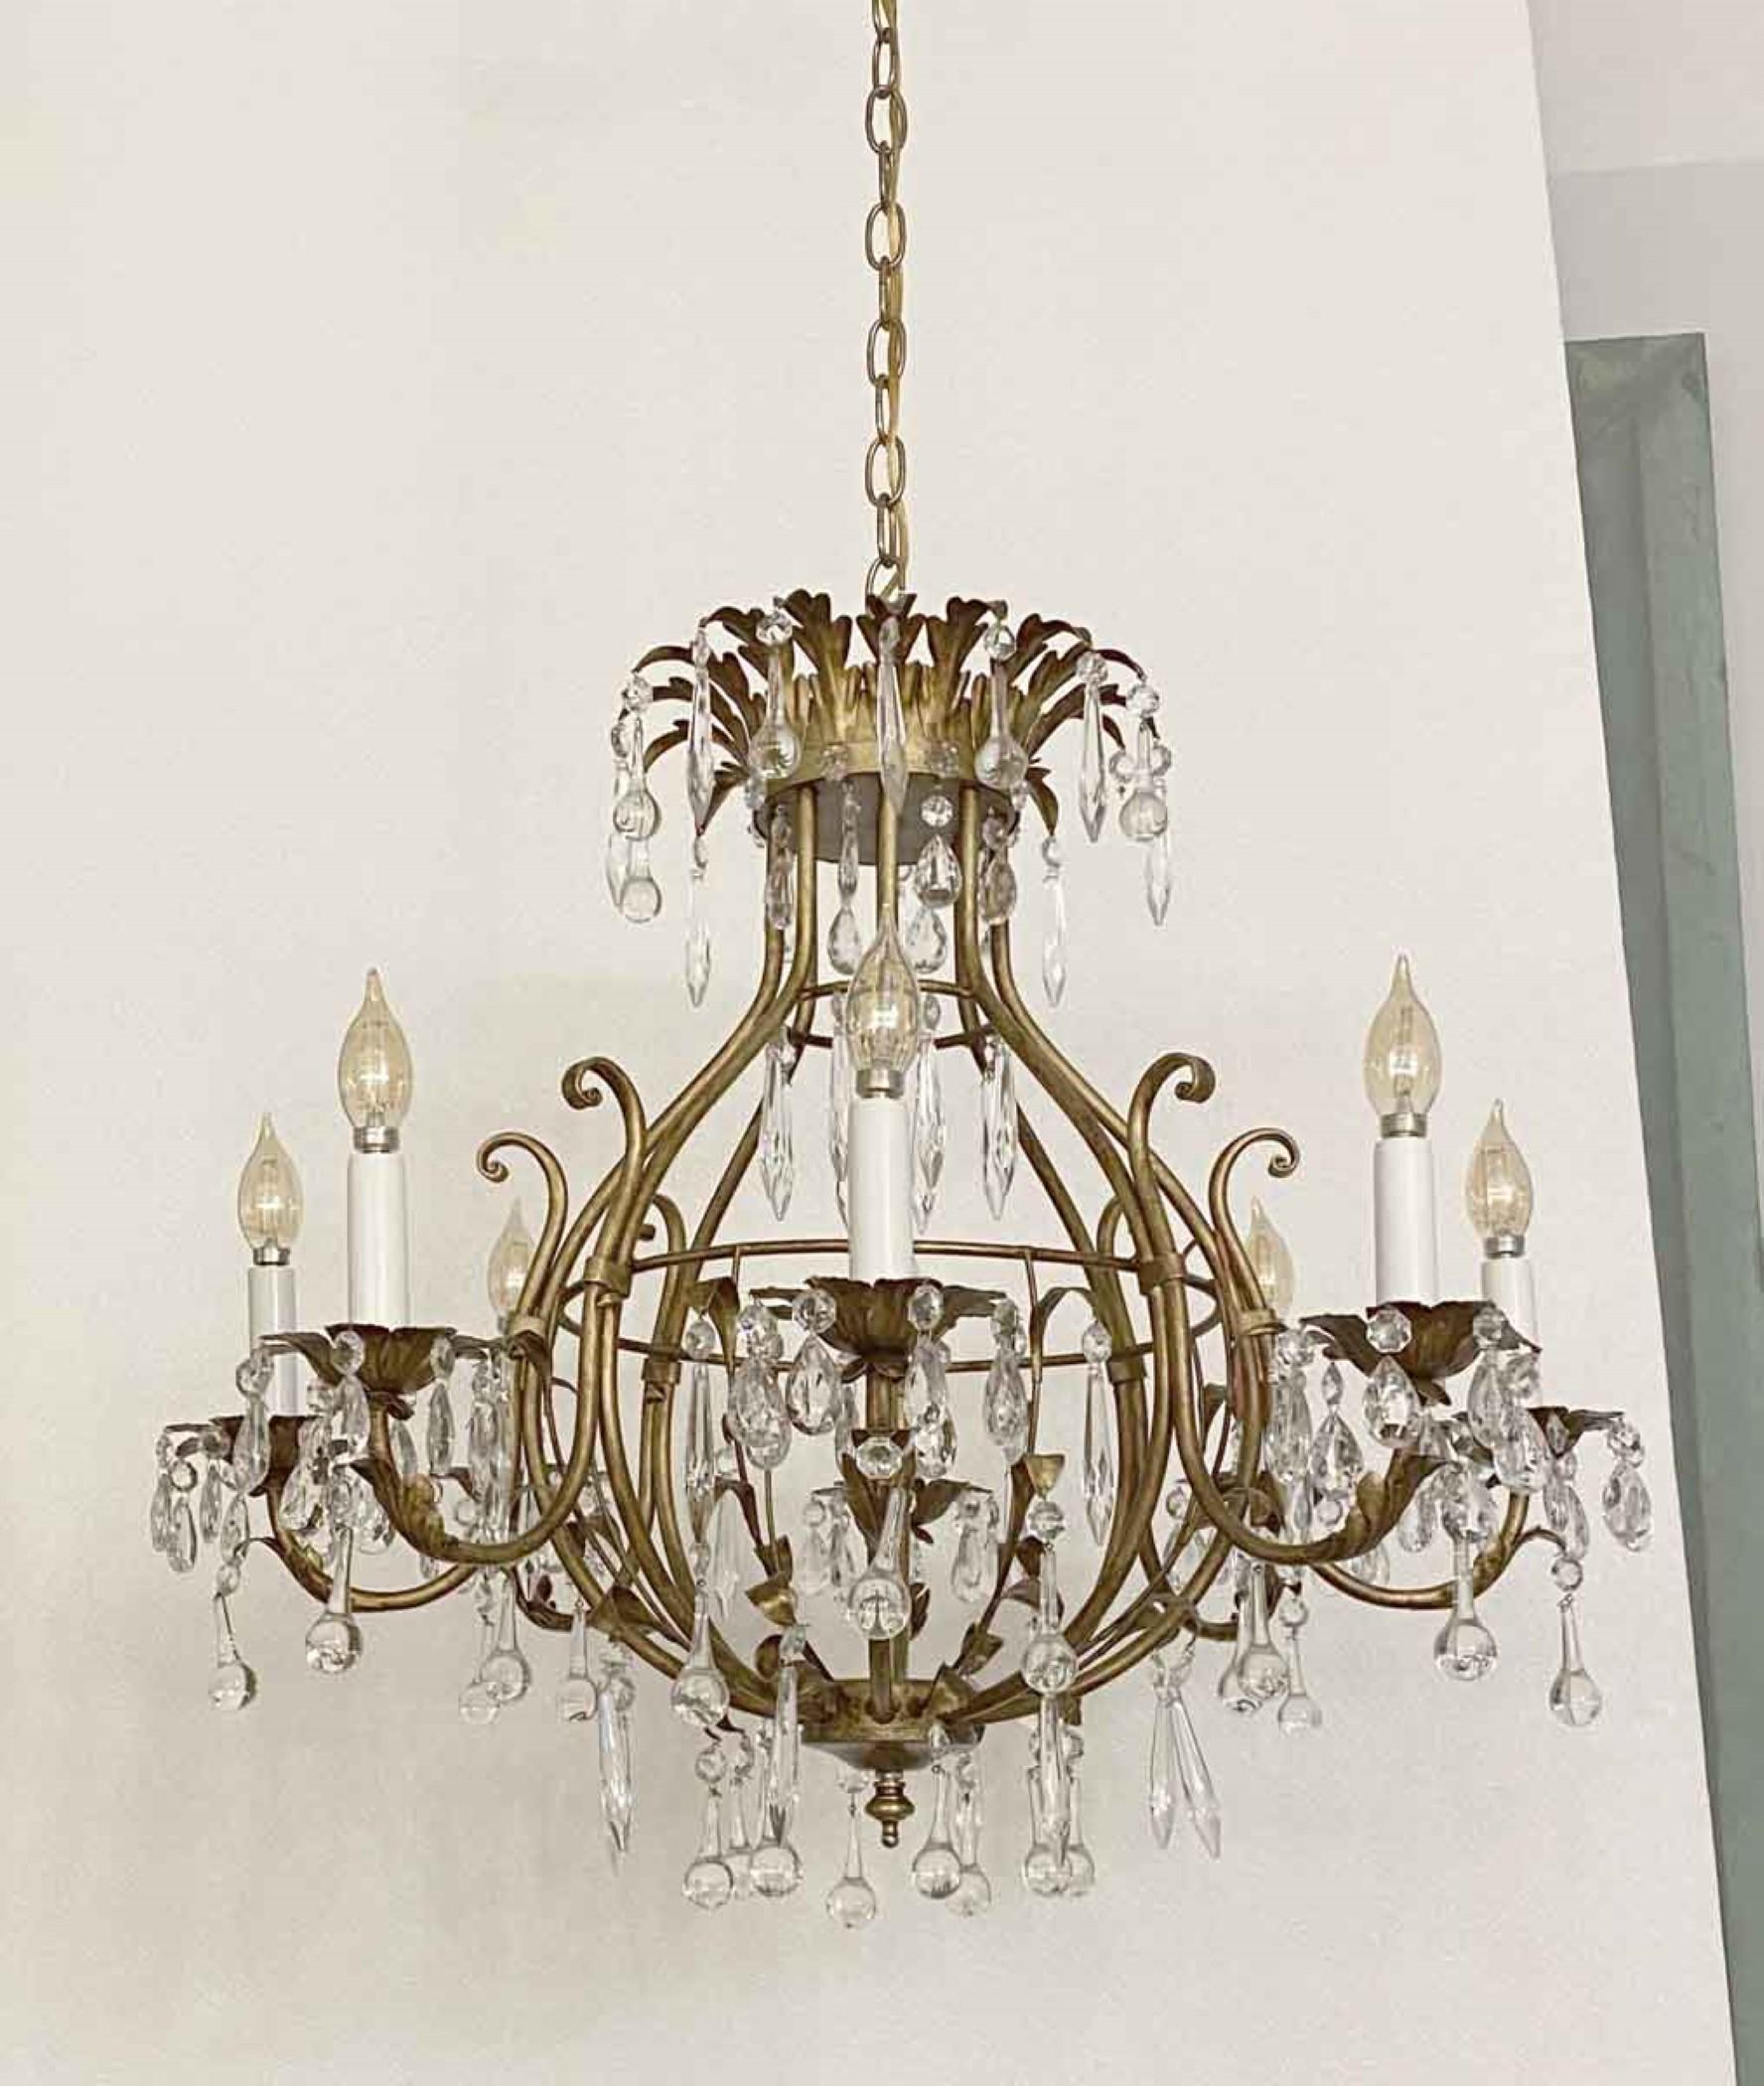 This 1980s chandelier has flower bobeches along with a leaf design crown, in the Florentine style. It displays teardrop crystals and gilt metal, with a round globe-like center. There are eight lights which take candelabra bulbs, up to 60W max.